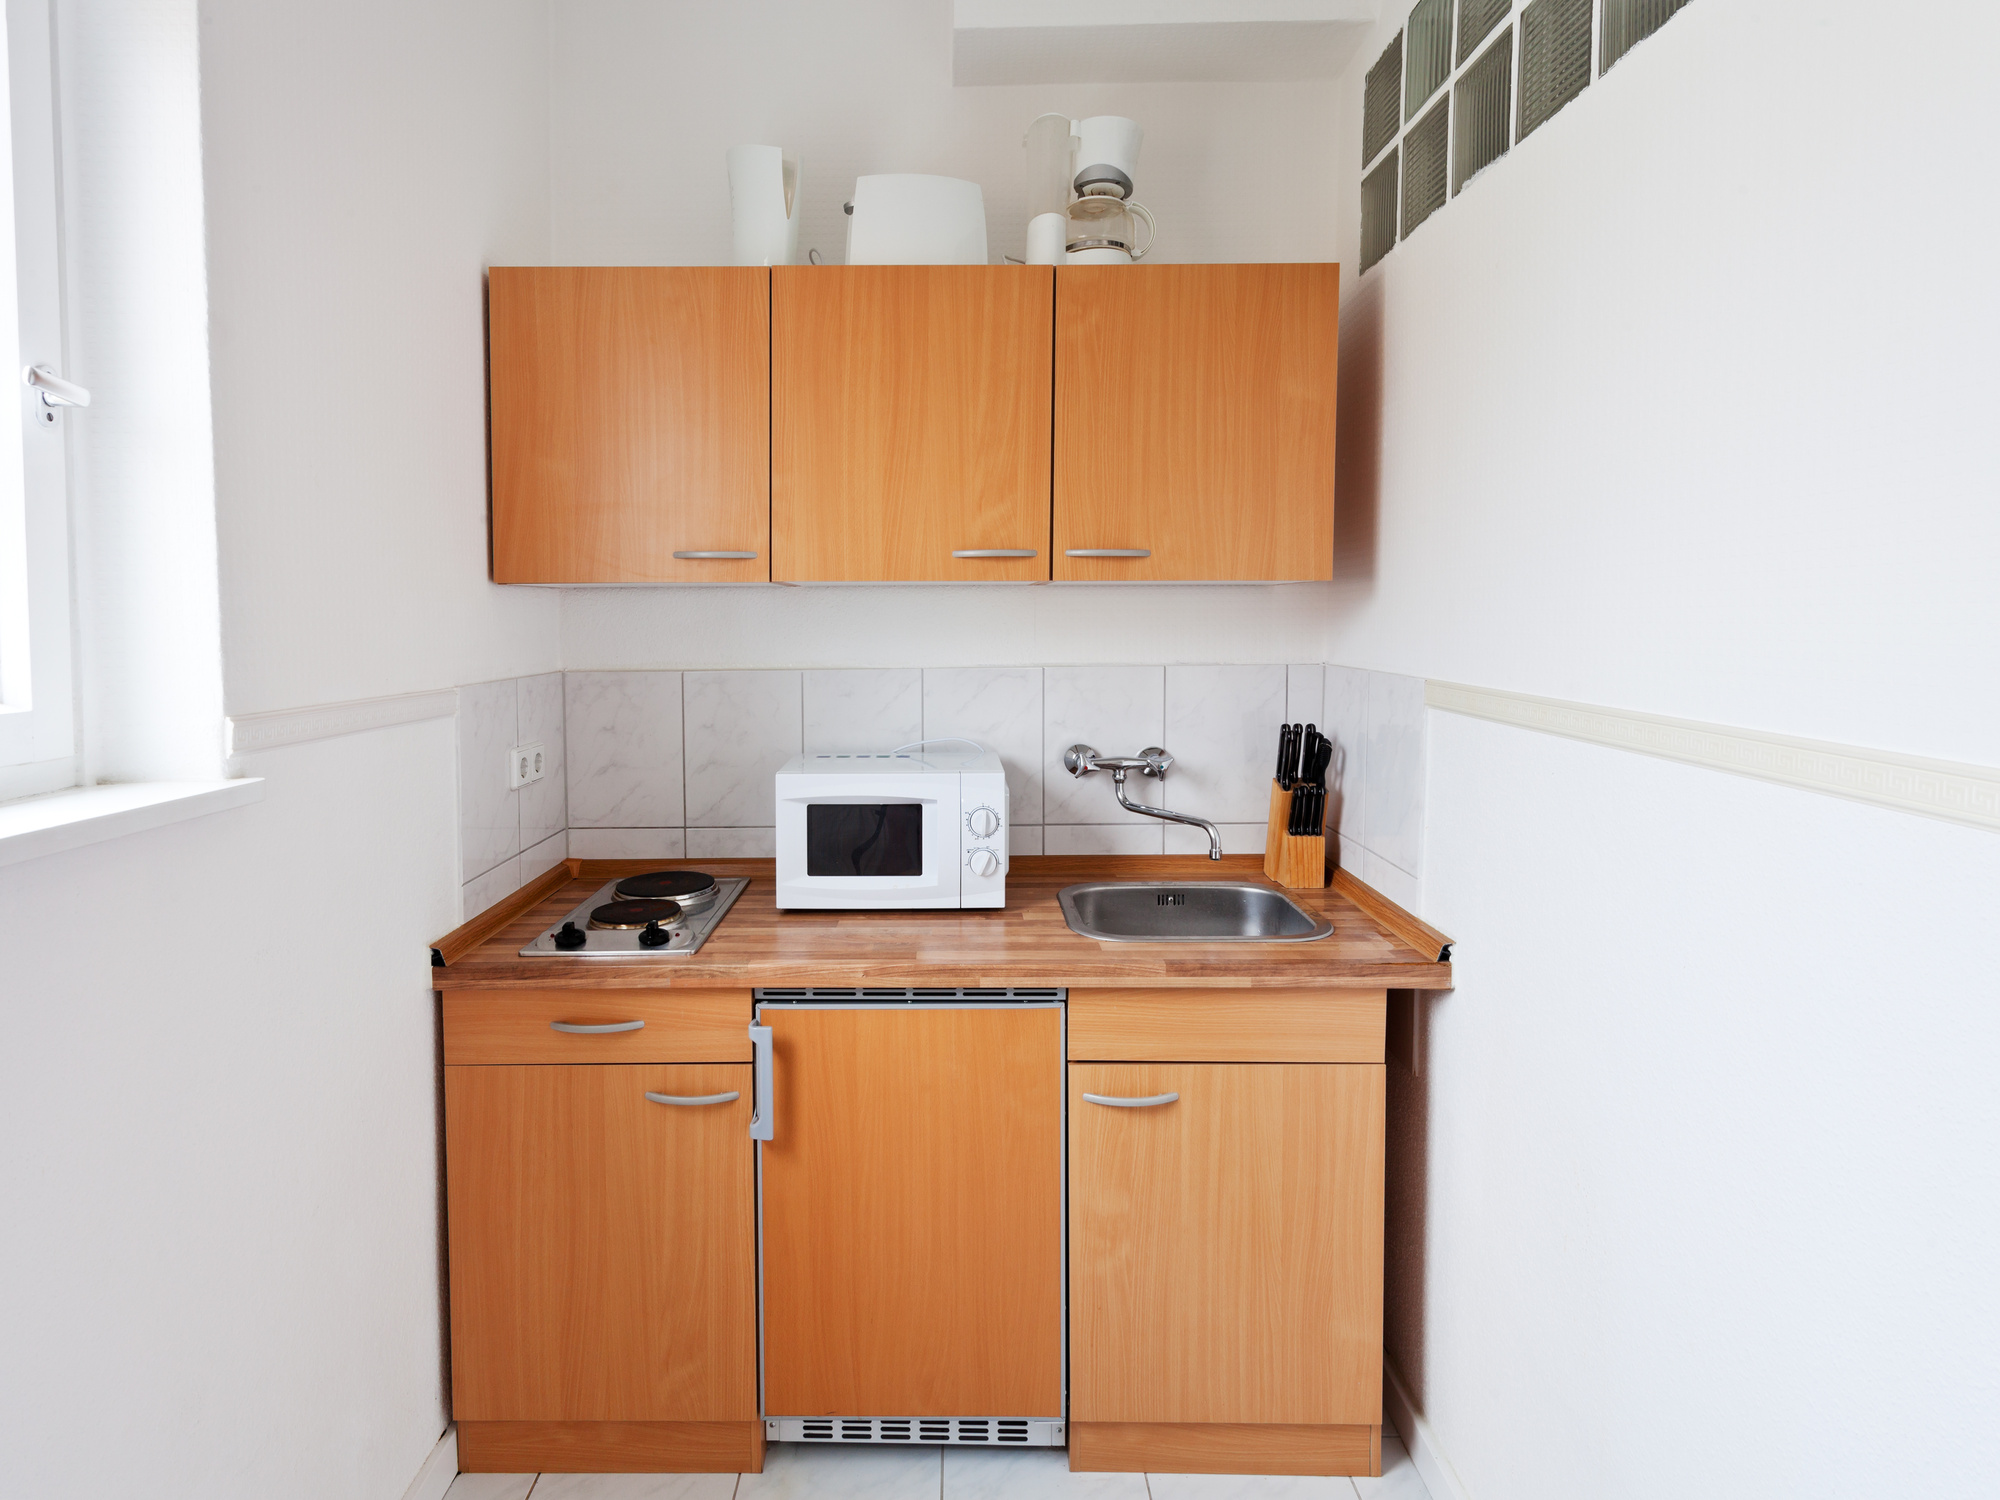 image of very small kitchen design